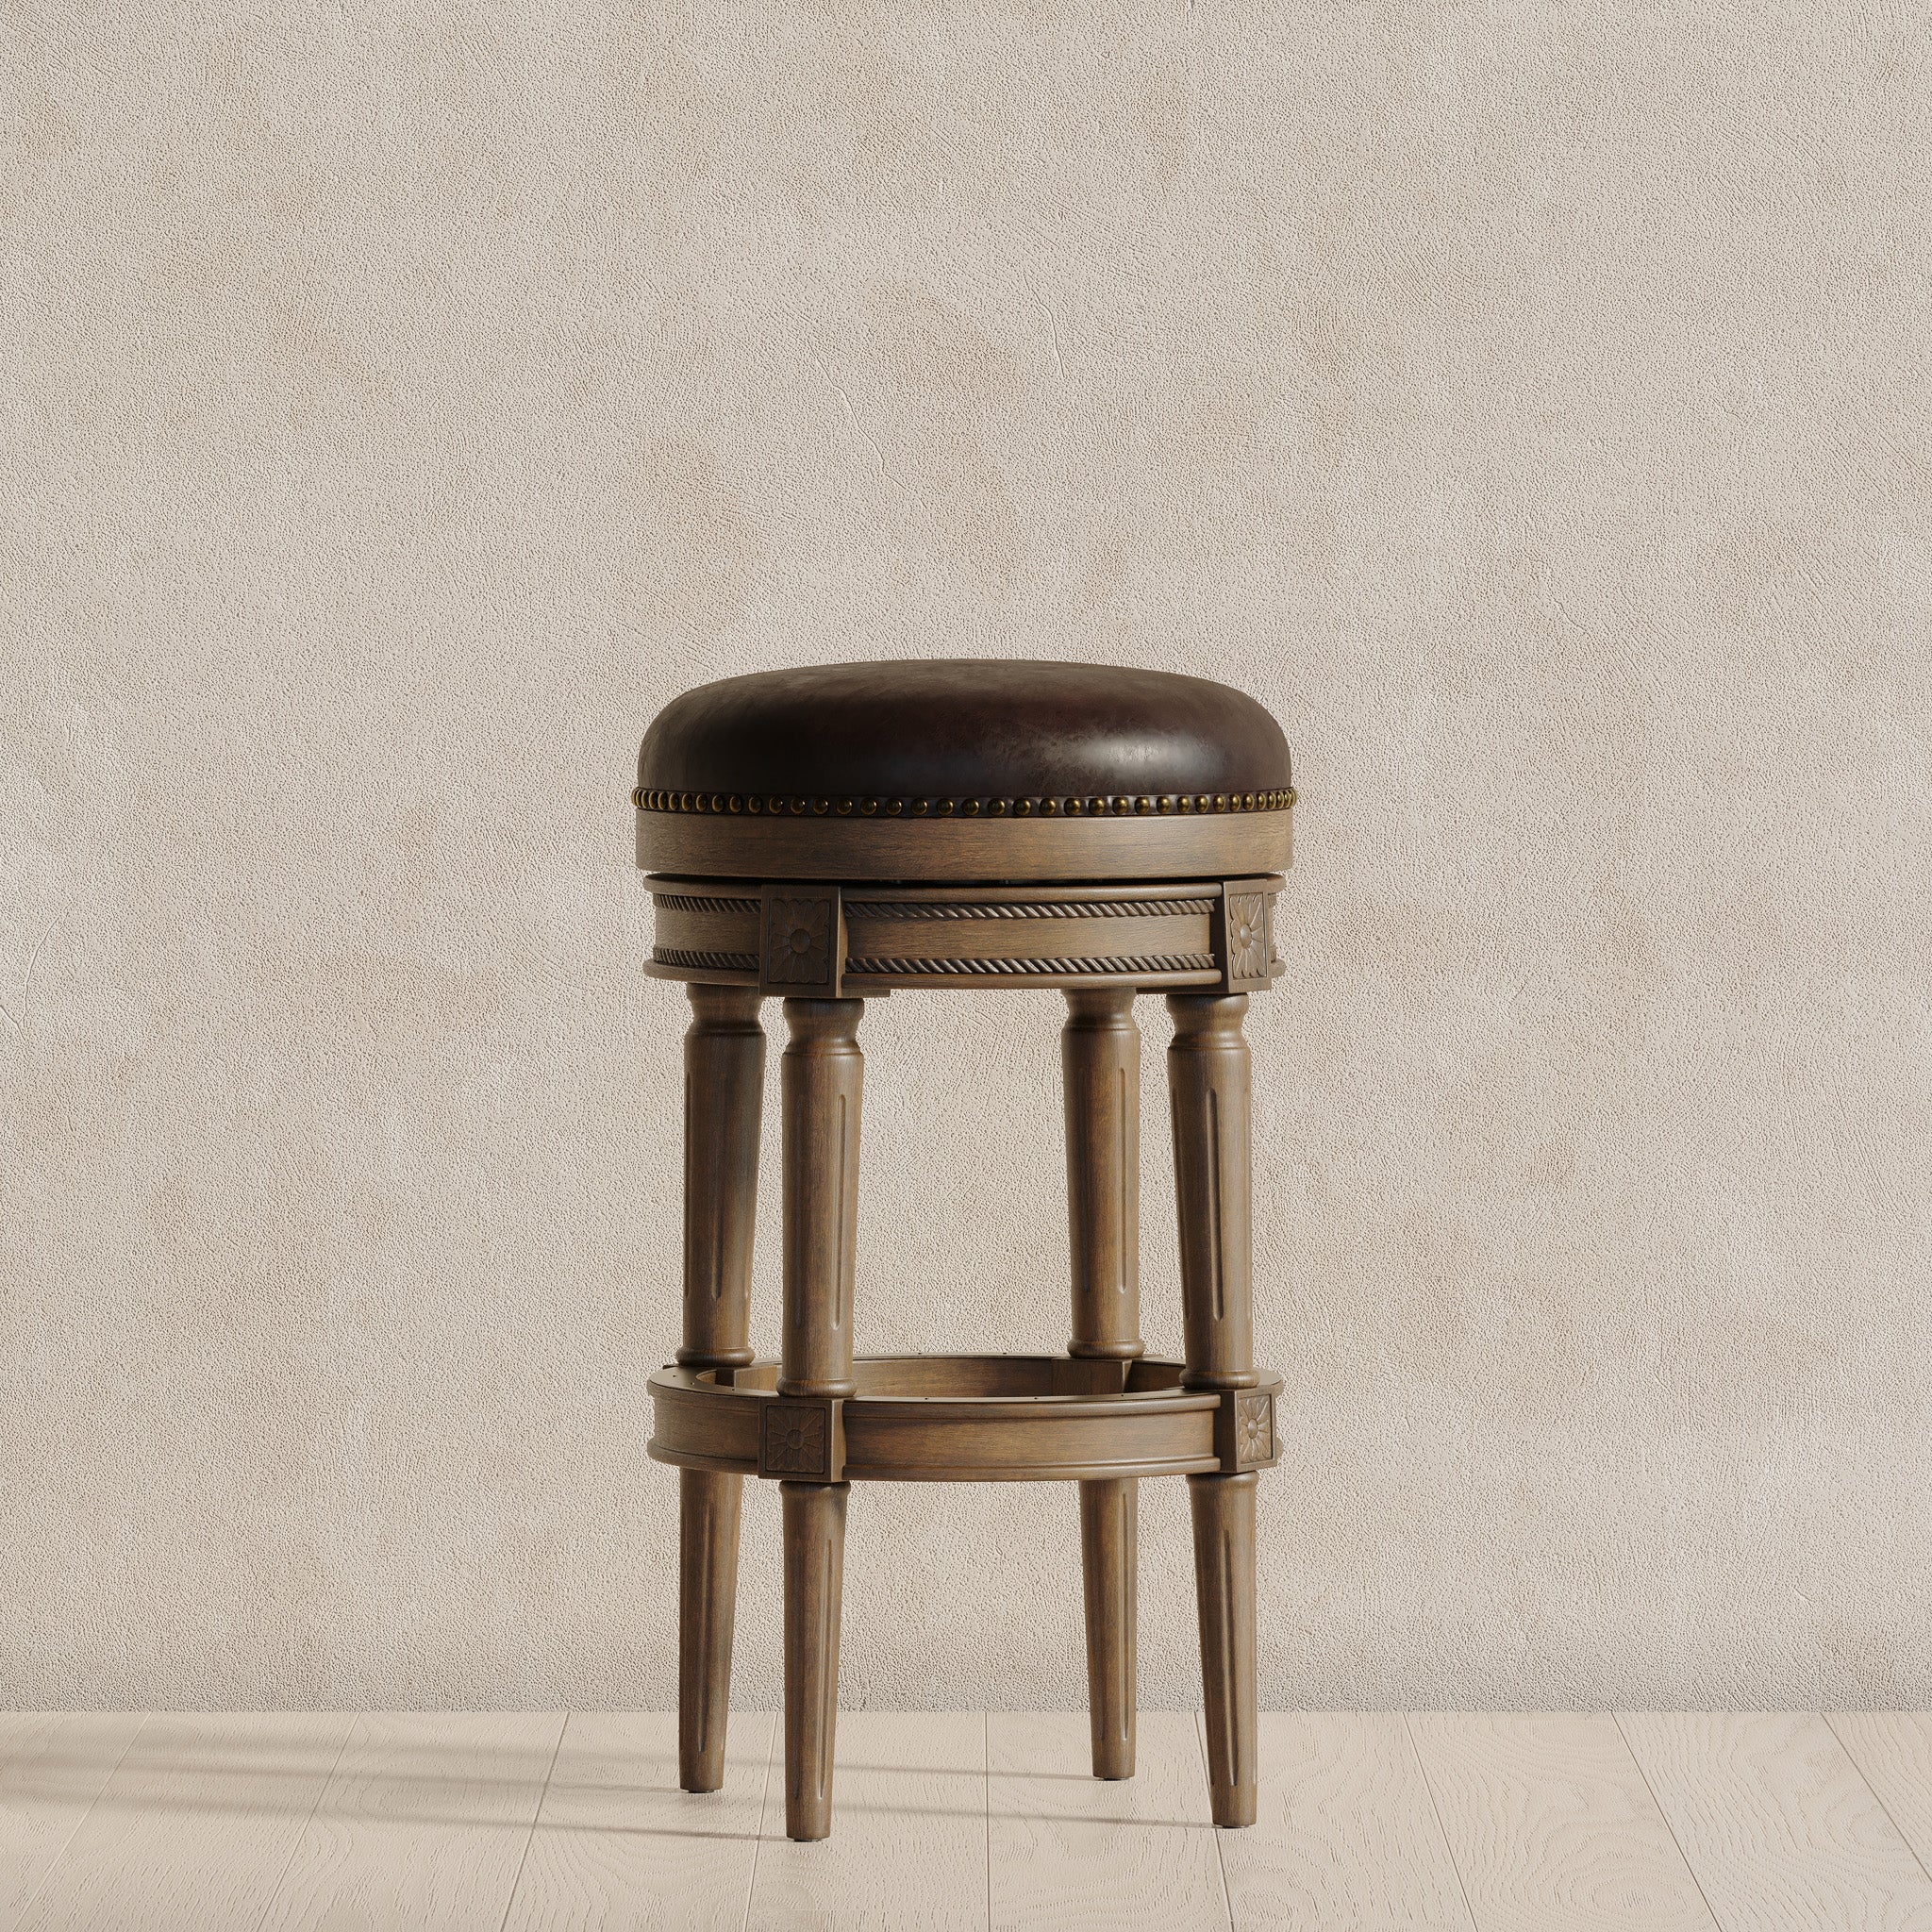 Pullman Backless Bar Stool in Walnut Finish with Marksman Saddle Vegan Leather in Stools by Maven Lane